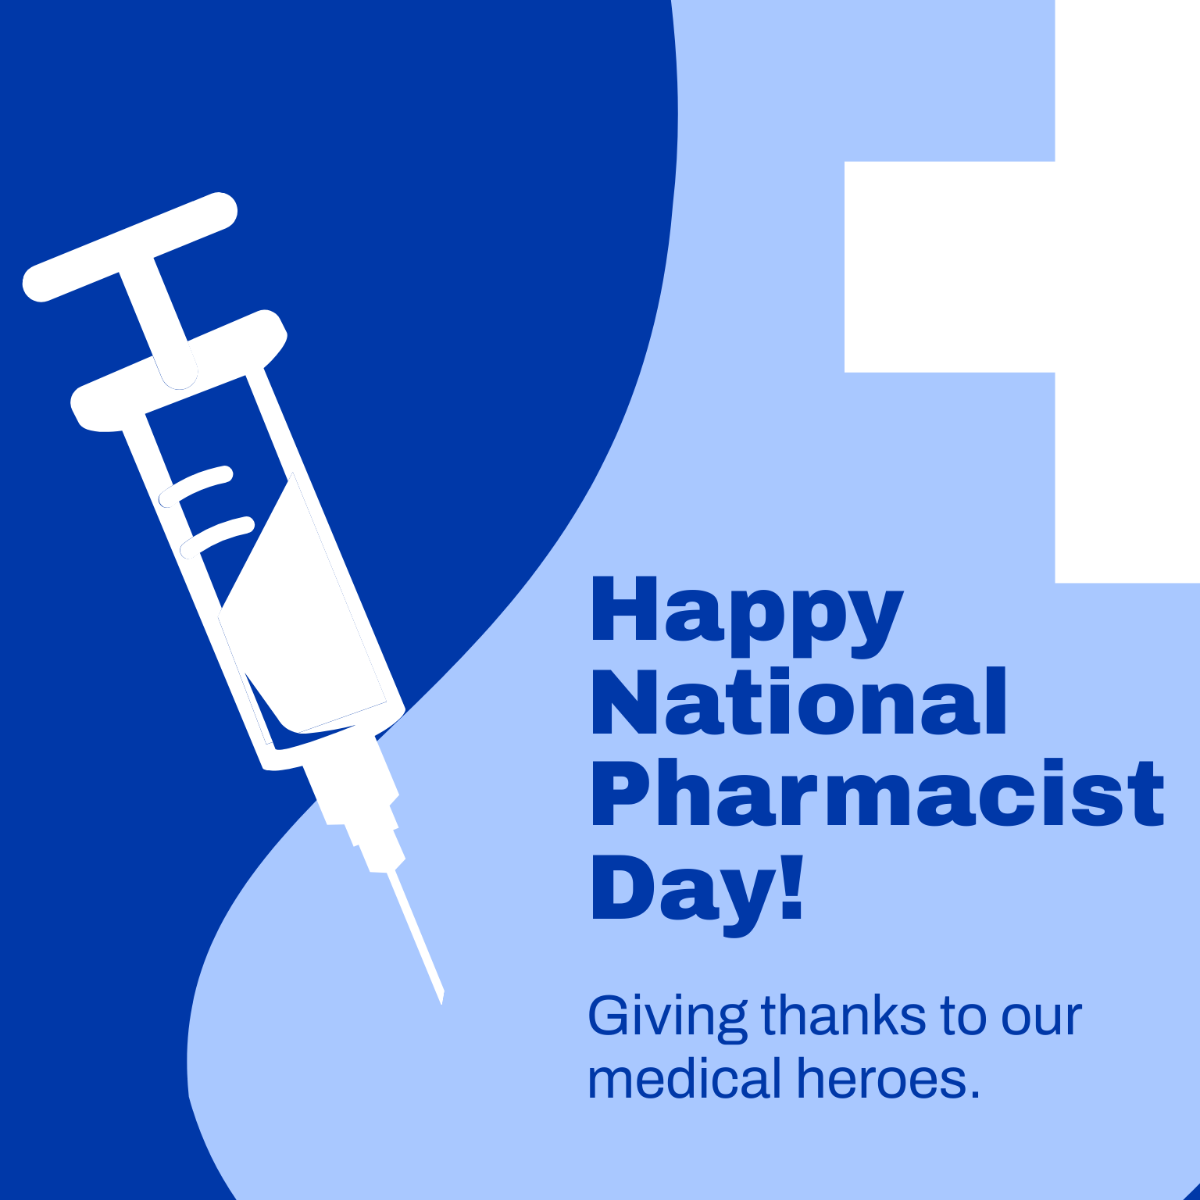 Free National Pharmacist Day Poster Vector Template